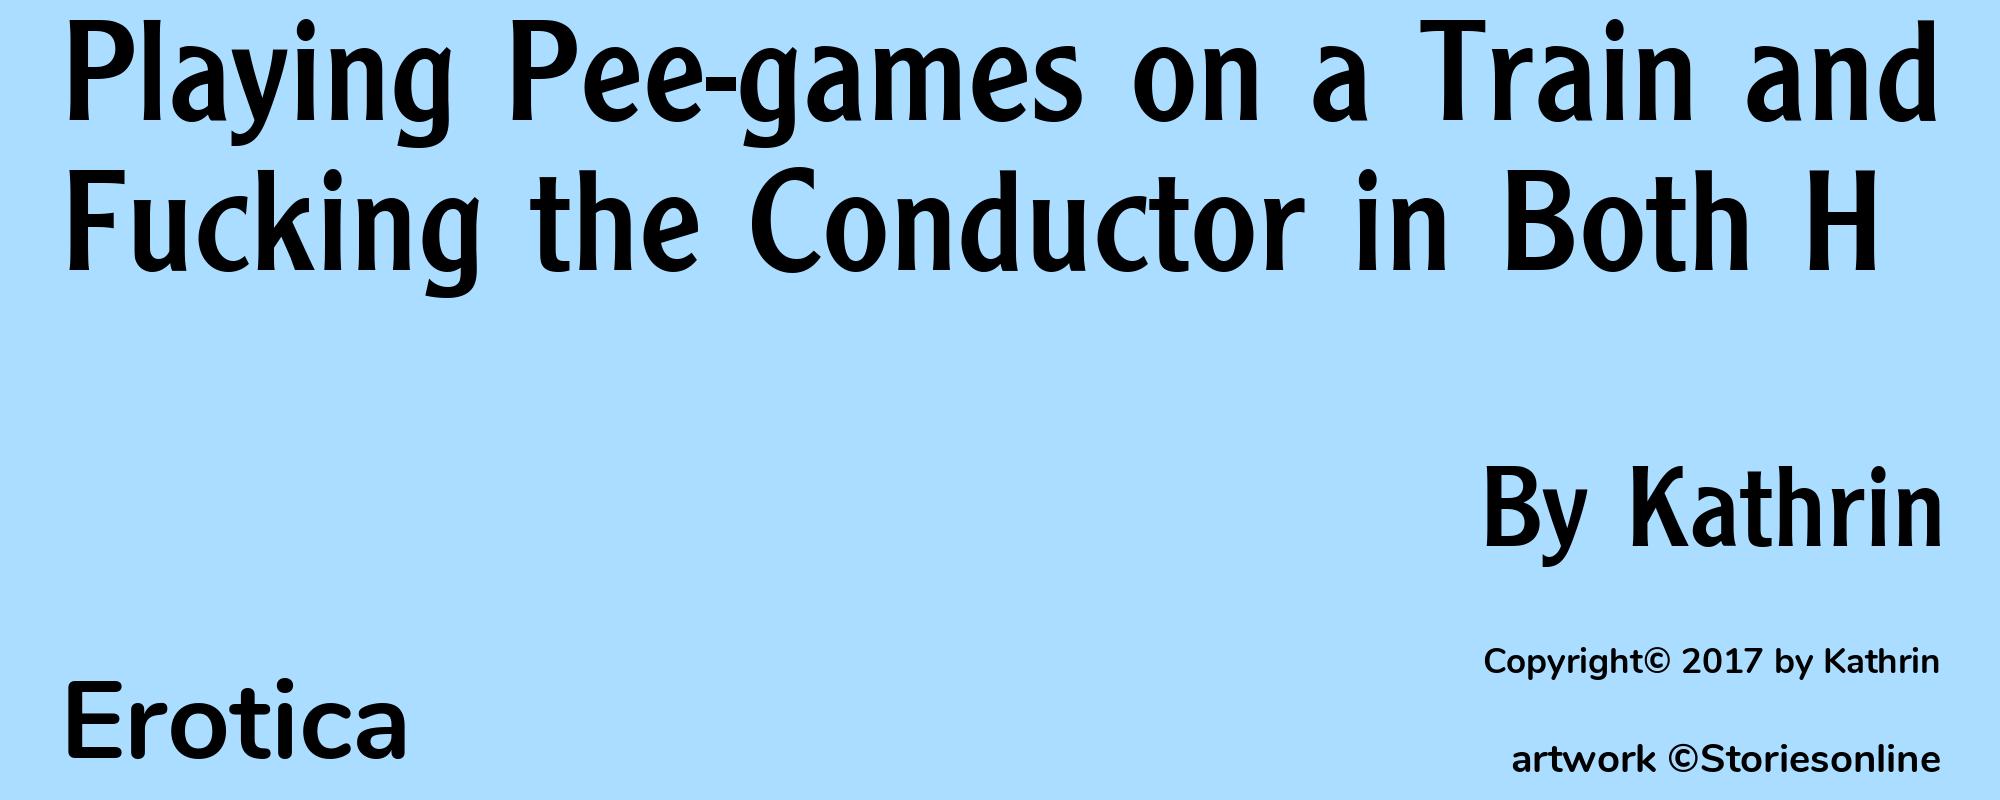 Playing Pee-games on a Train and Fucking the Conductor in Both H - Cover